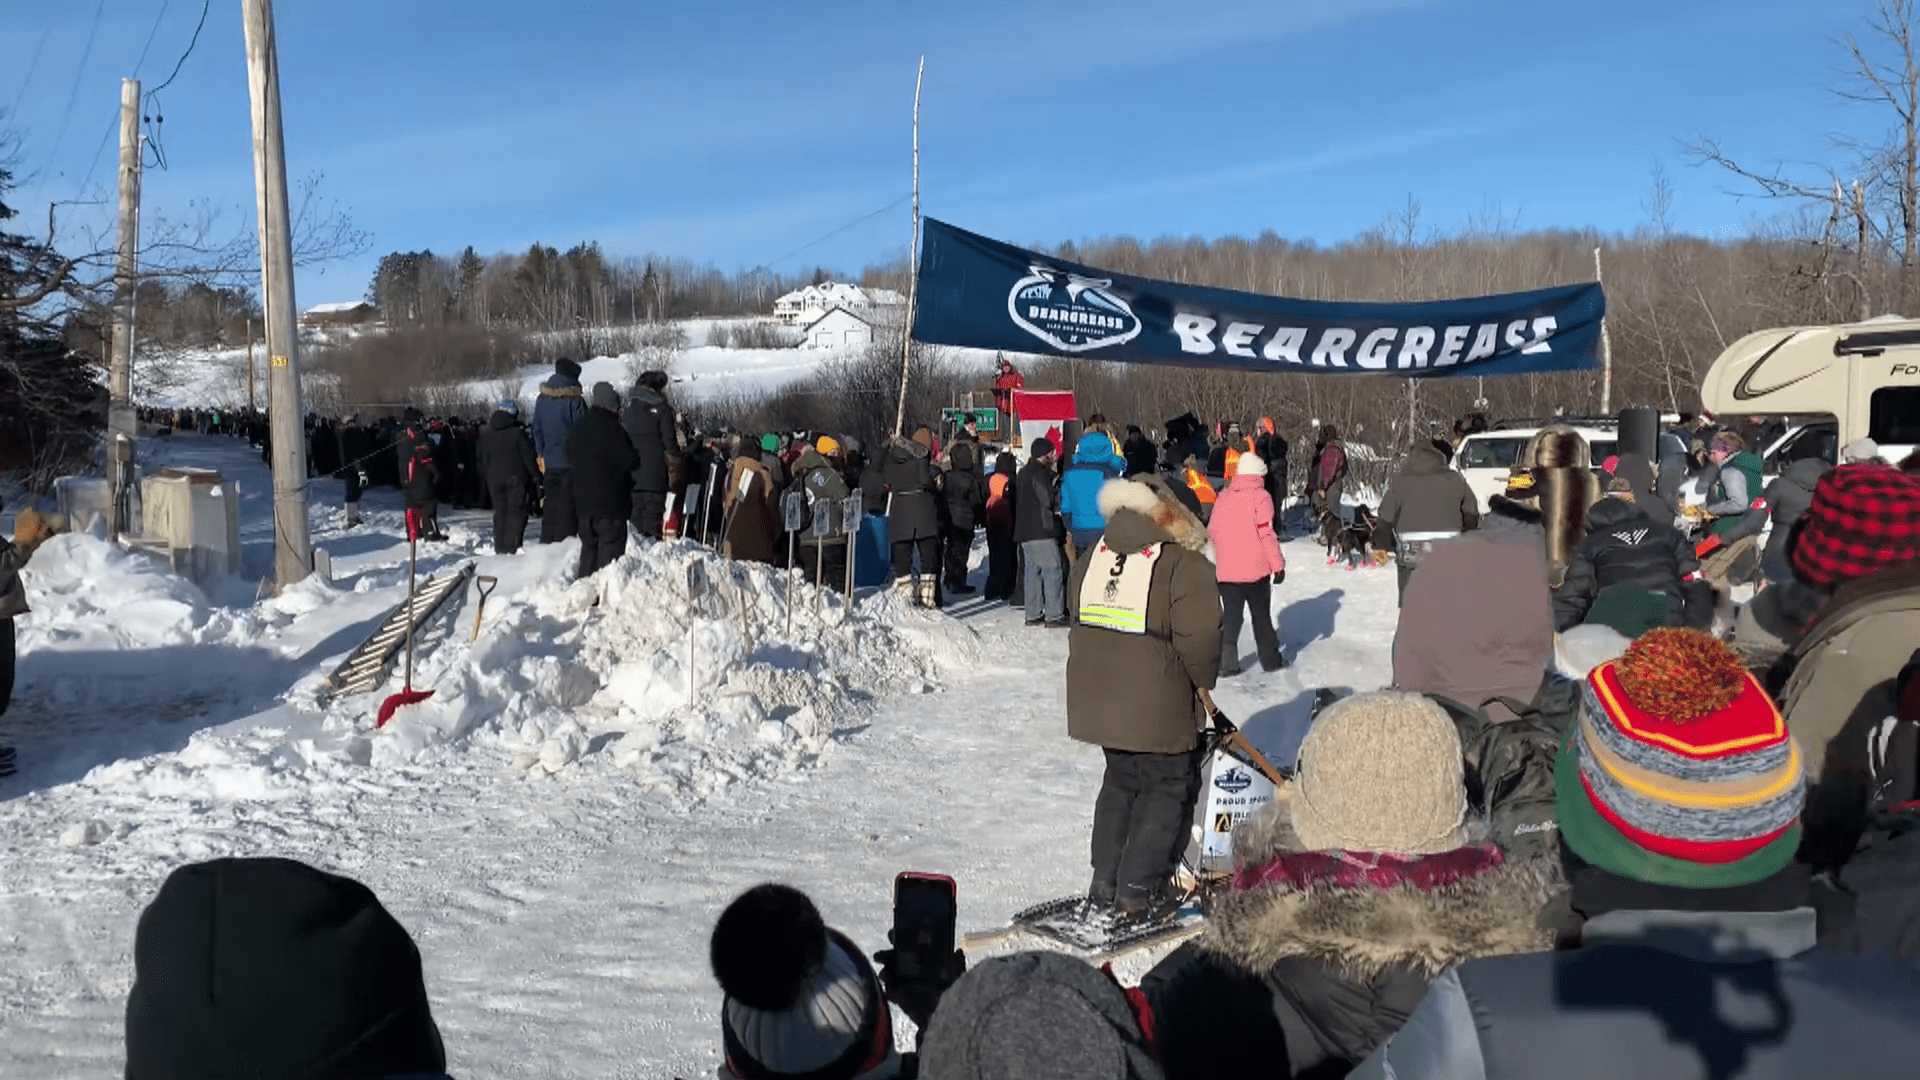 giant Beargrease banner marks the starting line with hundreds of people waiting for the mushers.